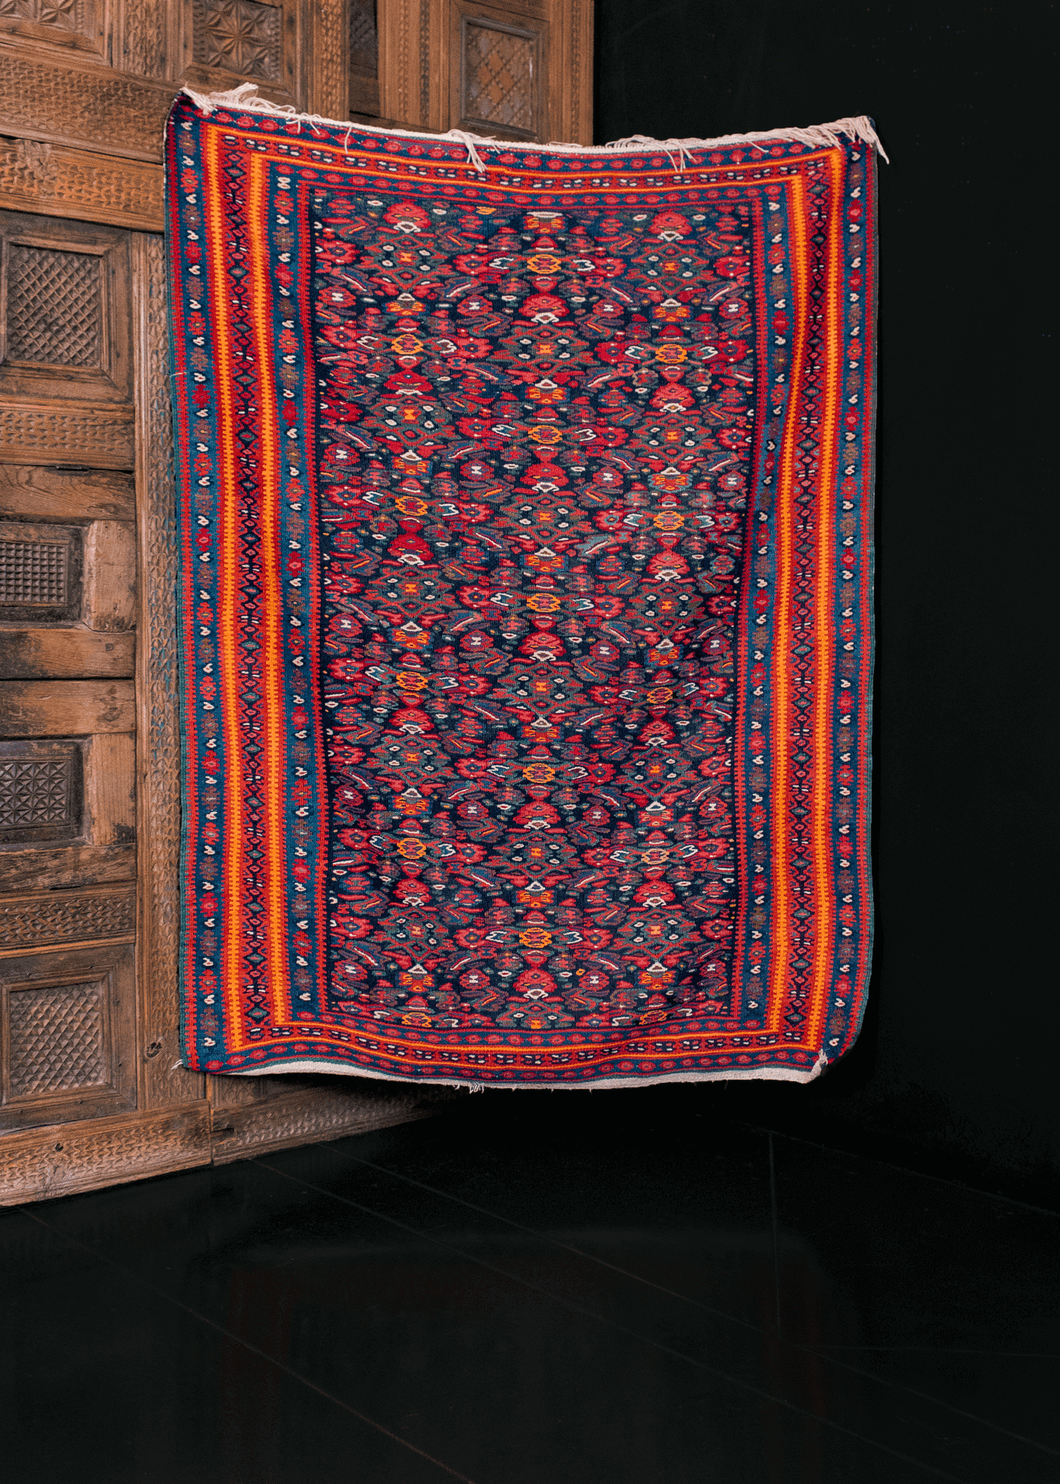 Senneh kilim in bright orange and pink on a deep blue field with allover pattern